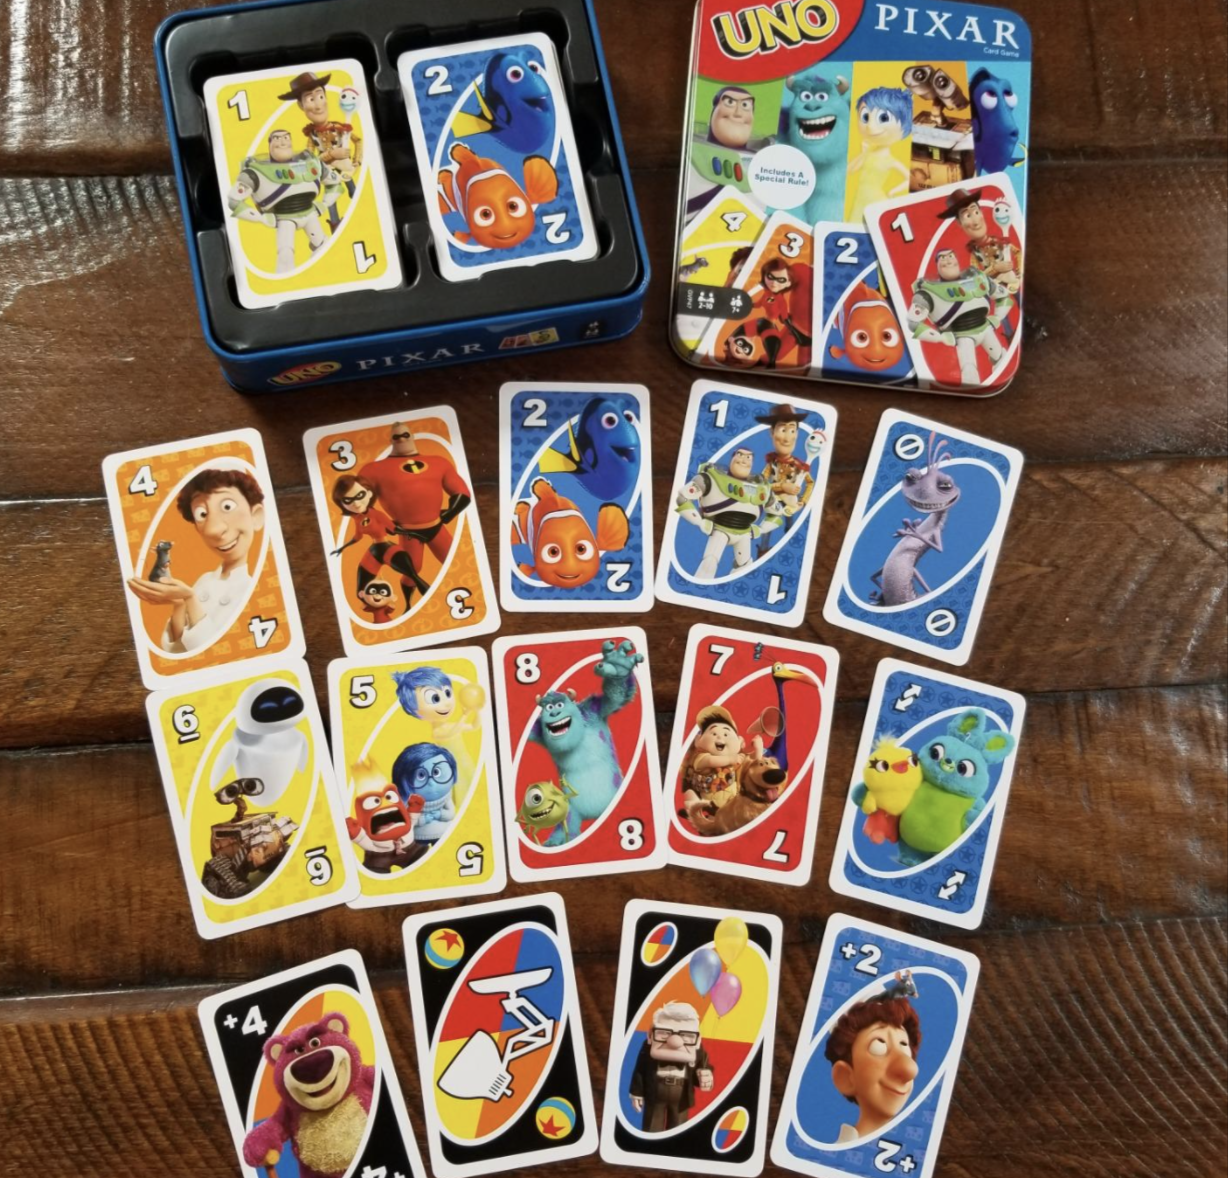 A customer review photo of the deck of Uno cards with characters from ratatouille, finding nemo, the incredibles, up, toy story, and more